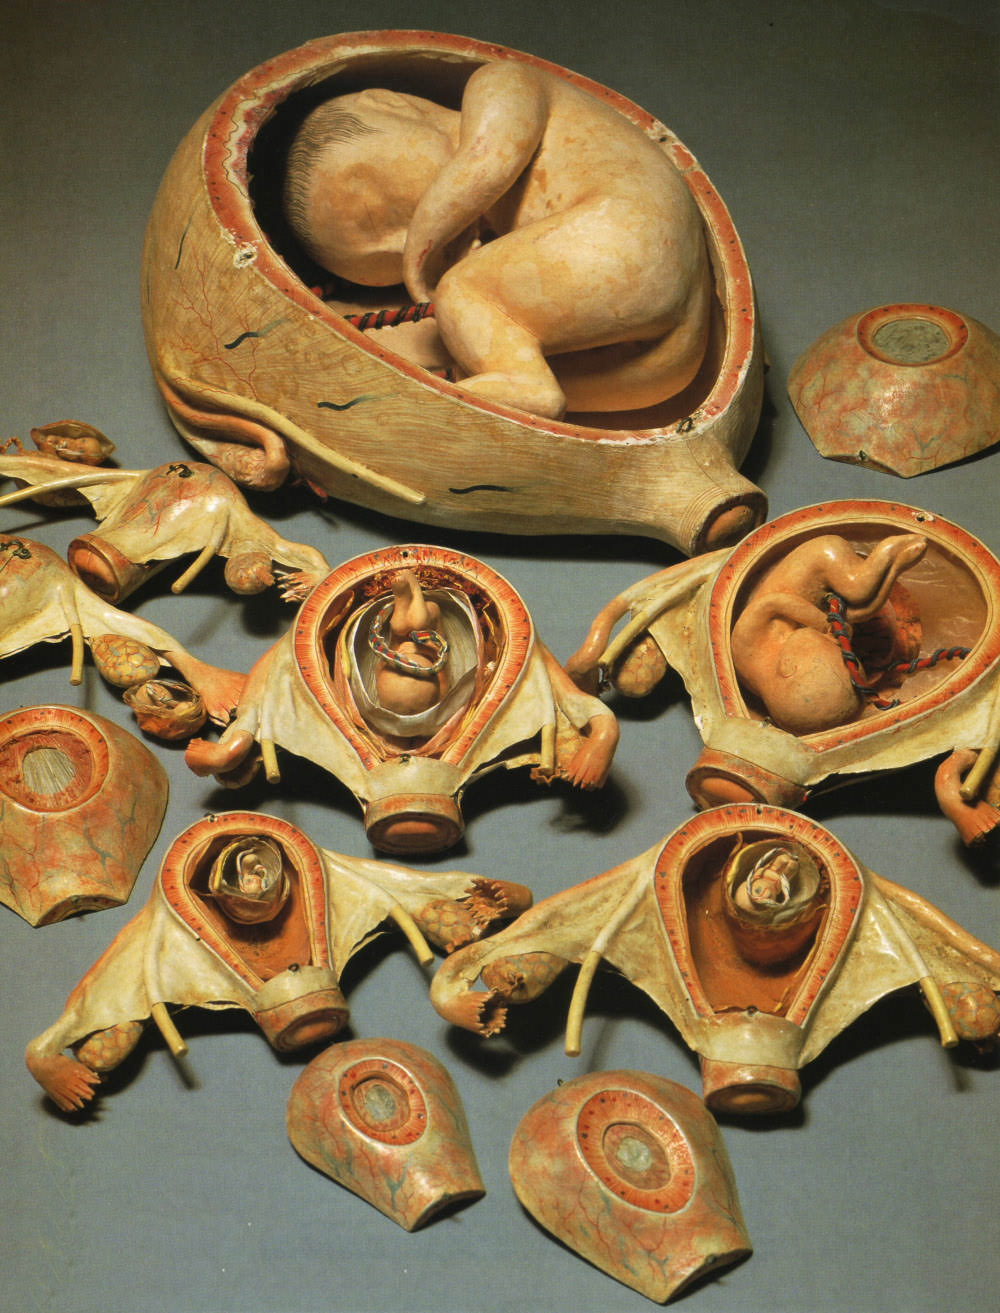 19th Century Japanese Pregnancy Dolls: A Fascinating Peek into Edo Period Sideshow Attractions